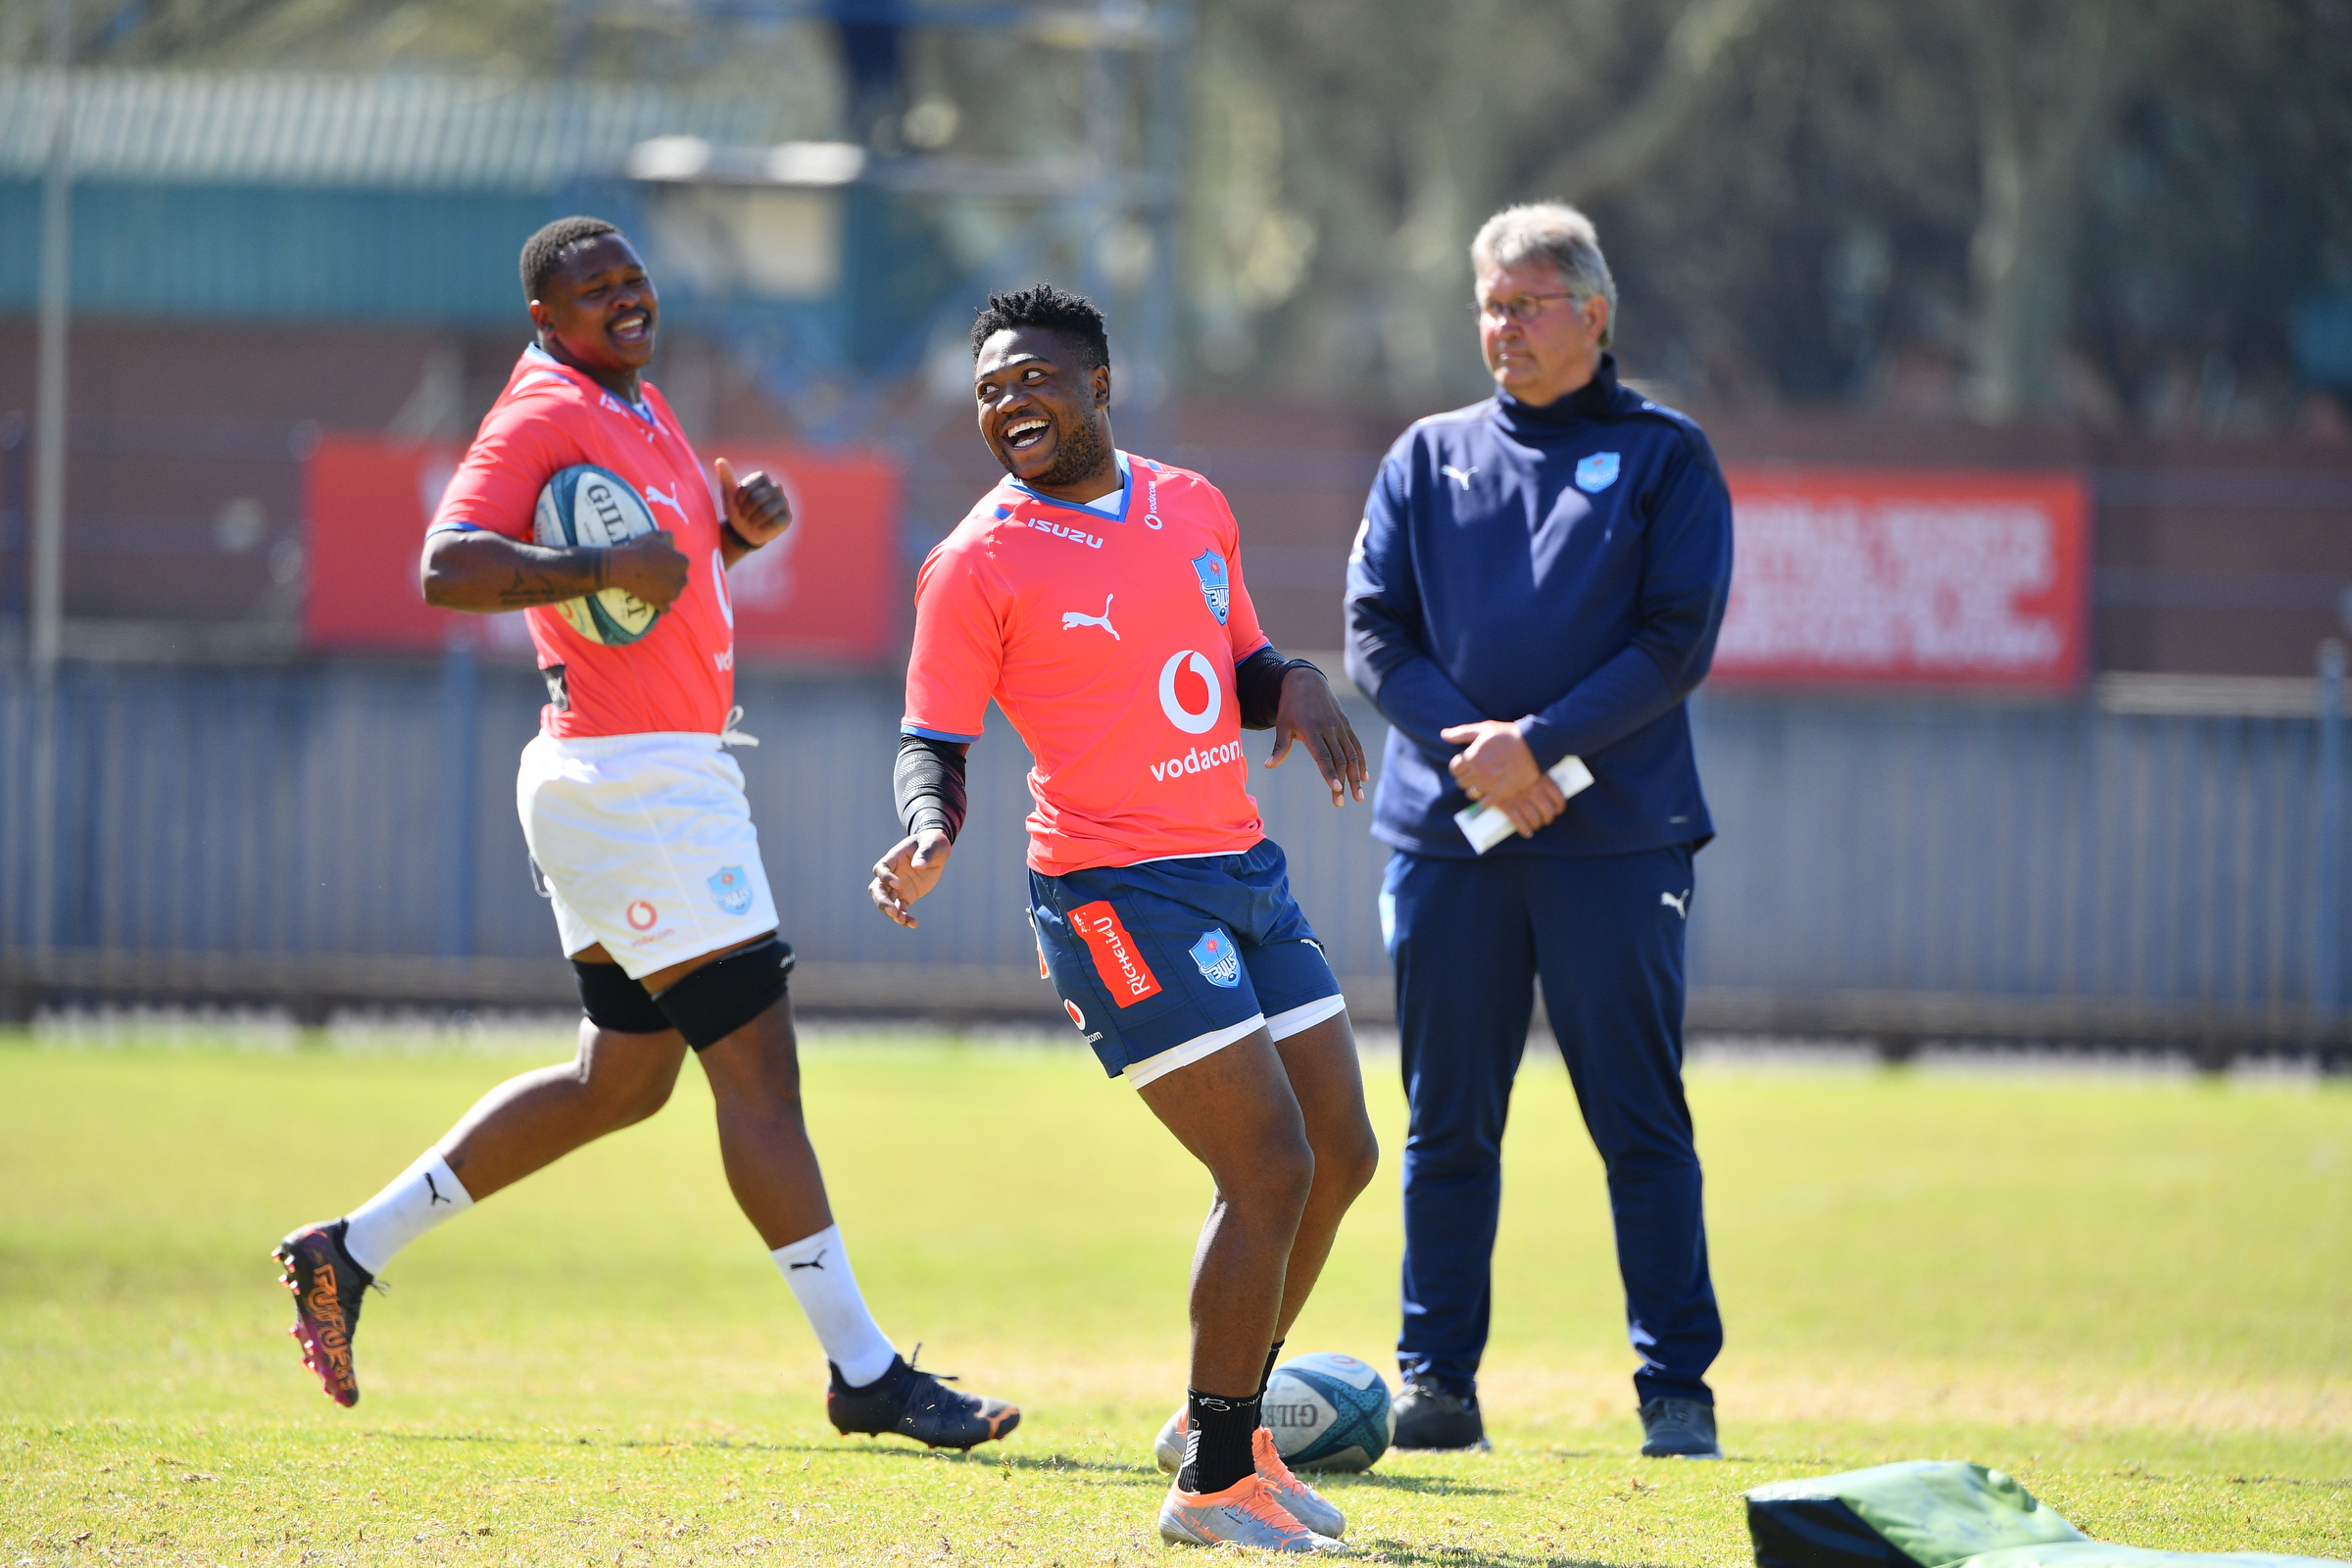 Simelane is scheduled to make his Bulls debut against his old team, the Lions